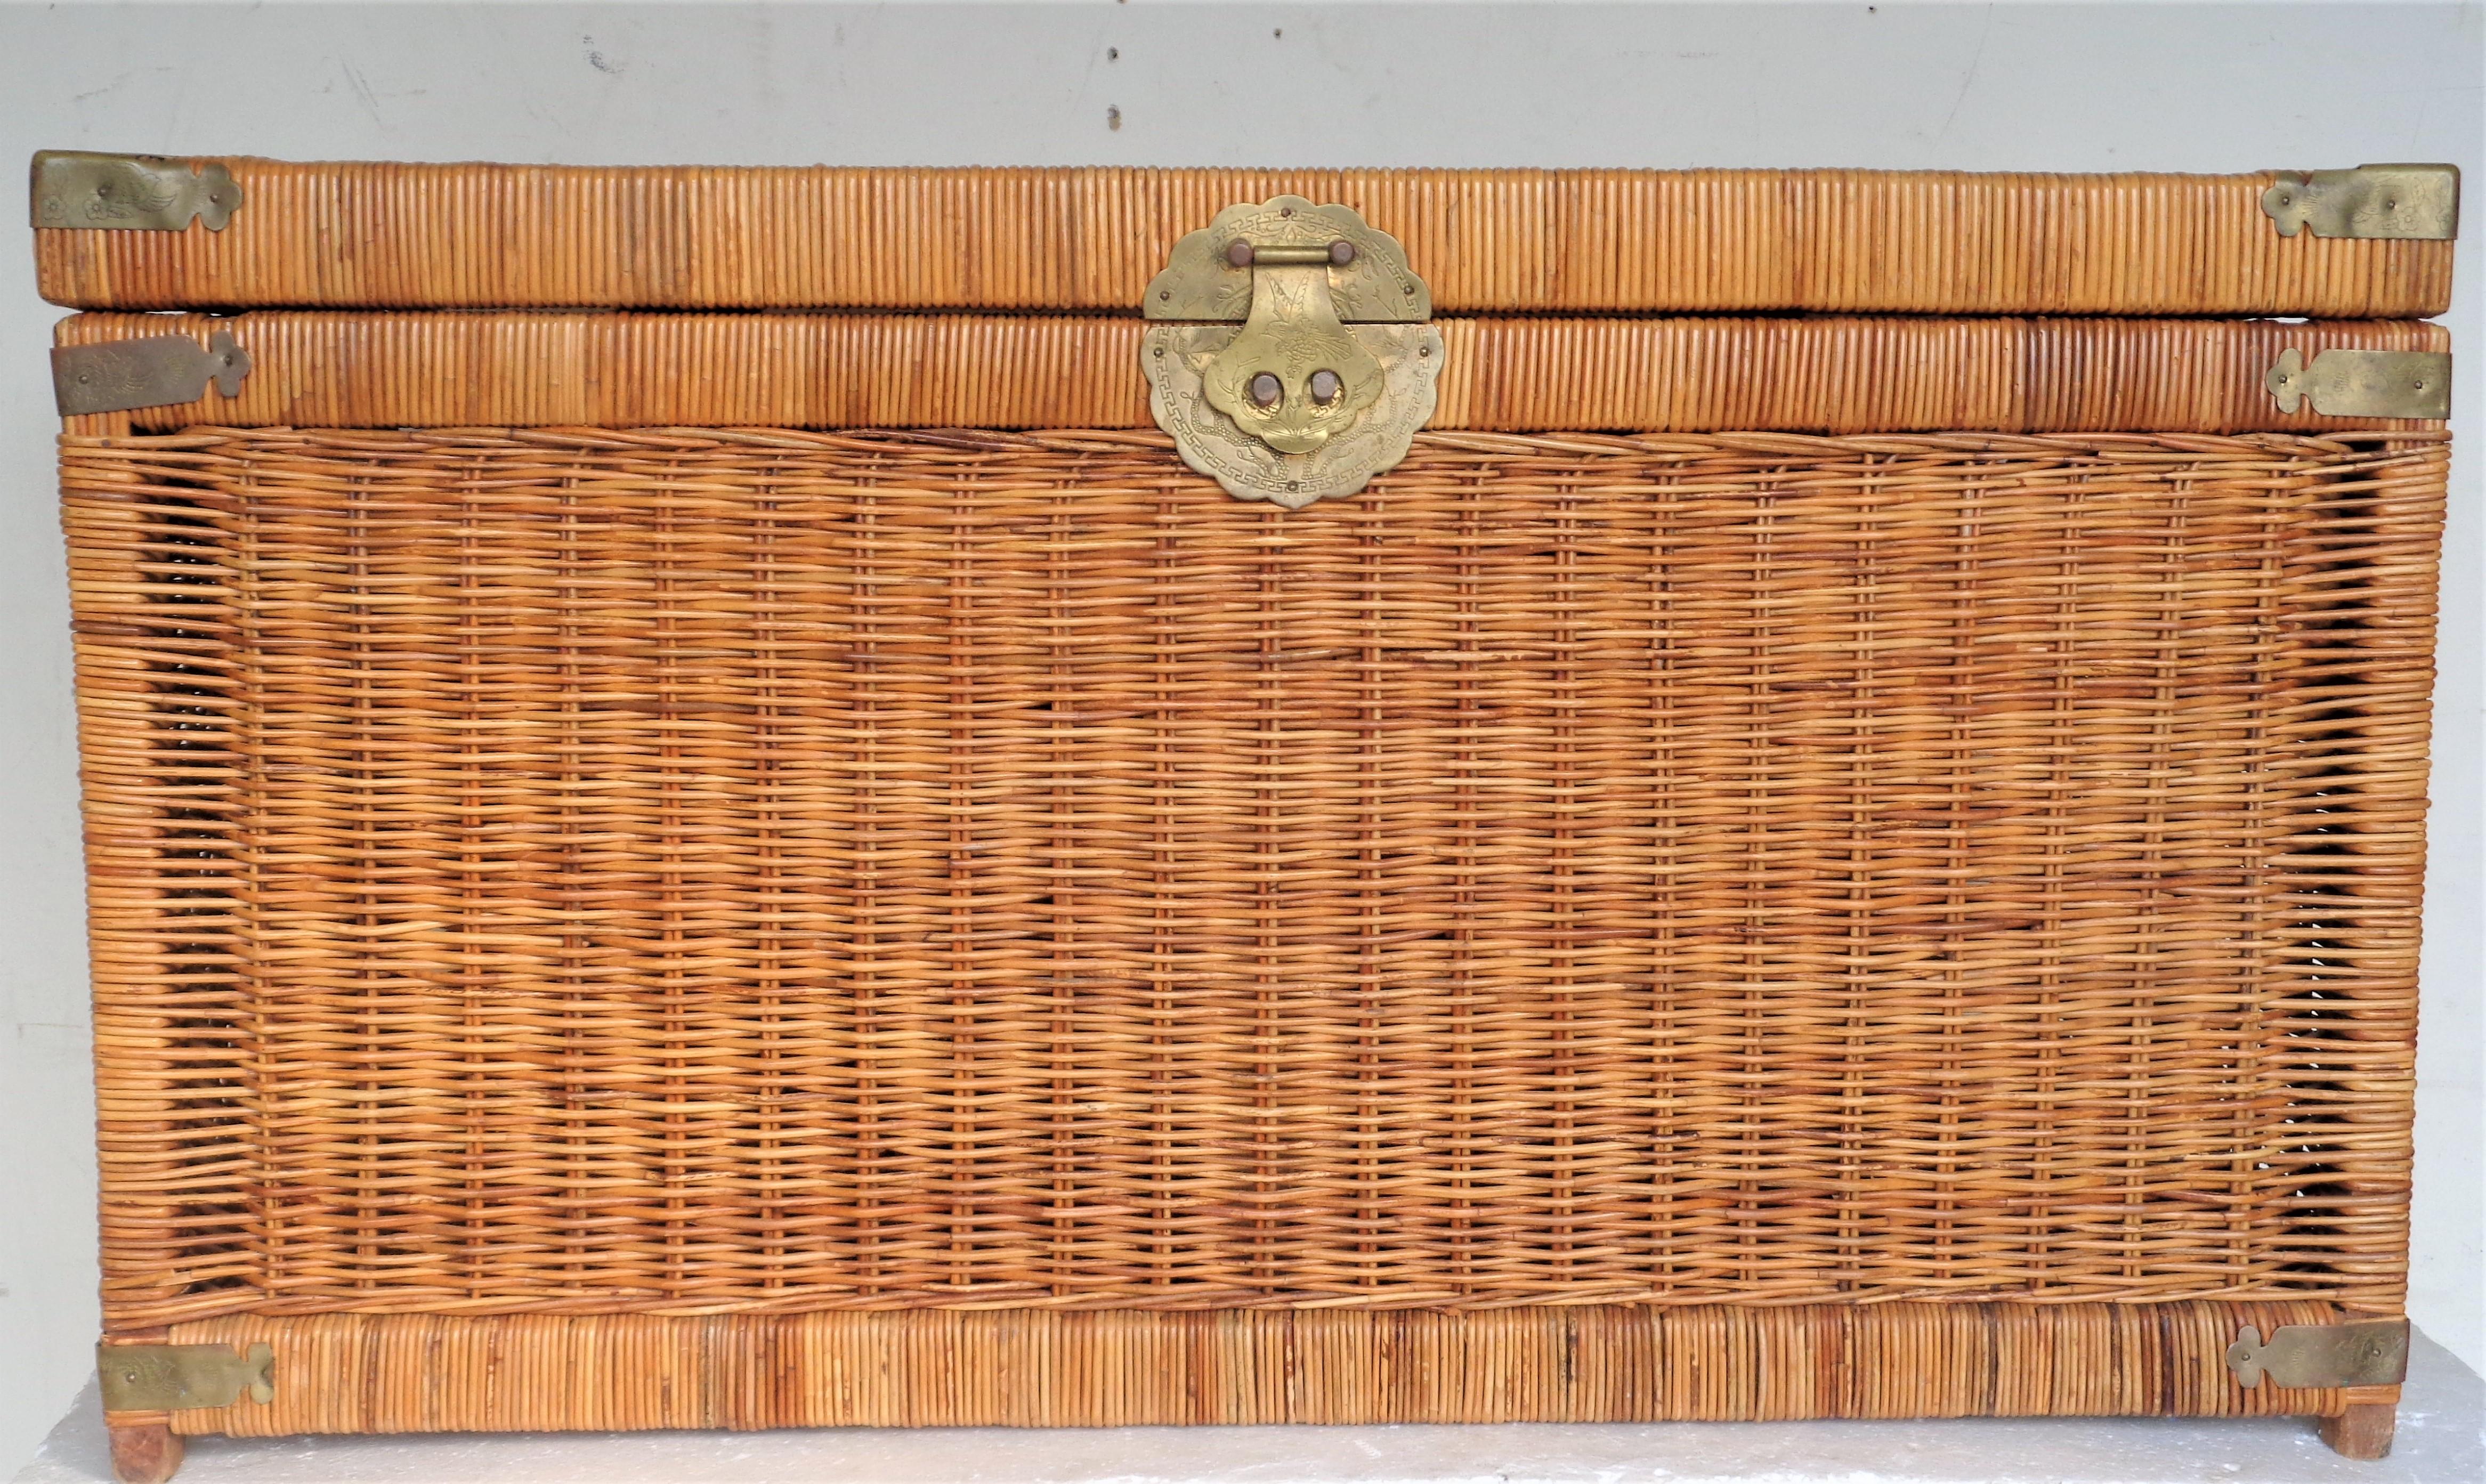 Campaign style wood frame woven natural wicker storage trunk in beautifully aged original honey colored surface with Asian motif decorated brass fittings / lock / side handles. The hinged top lid lifts to reveal a spacious open interior. Circa 1970.